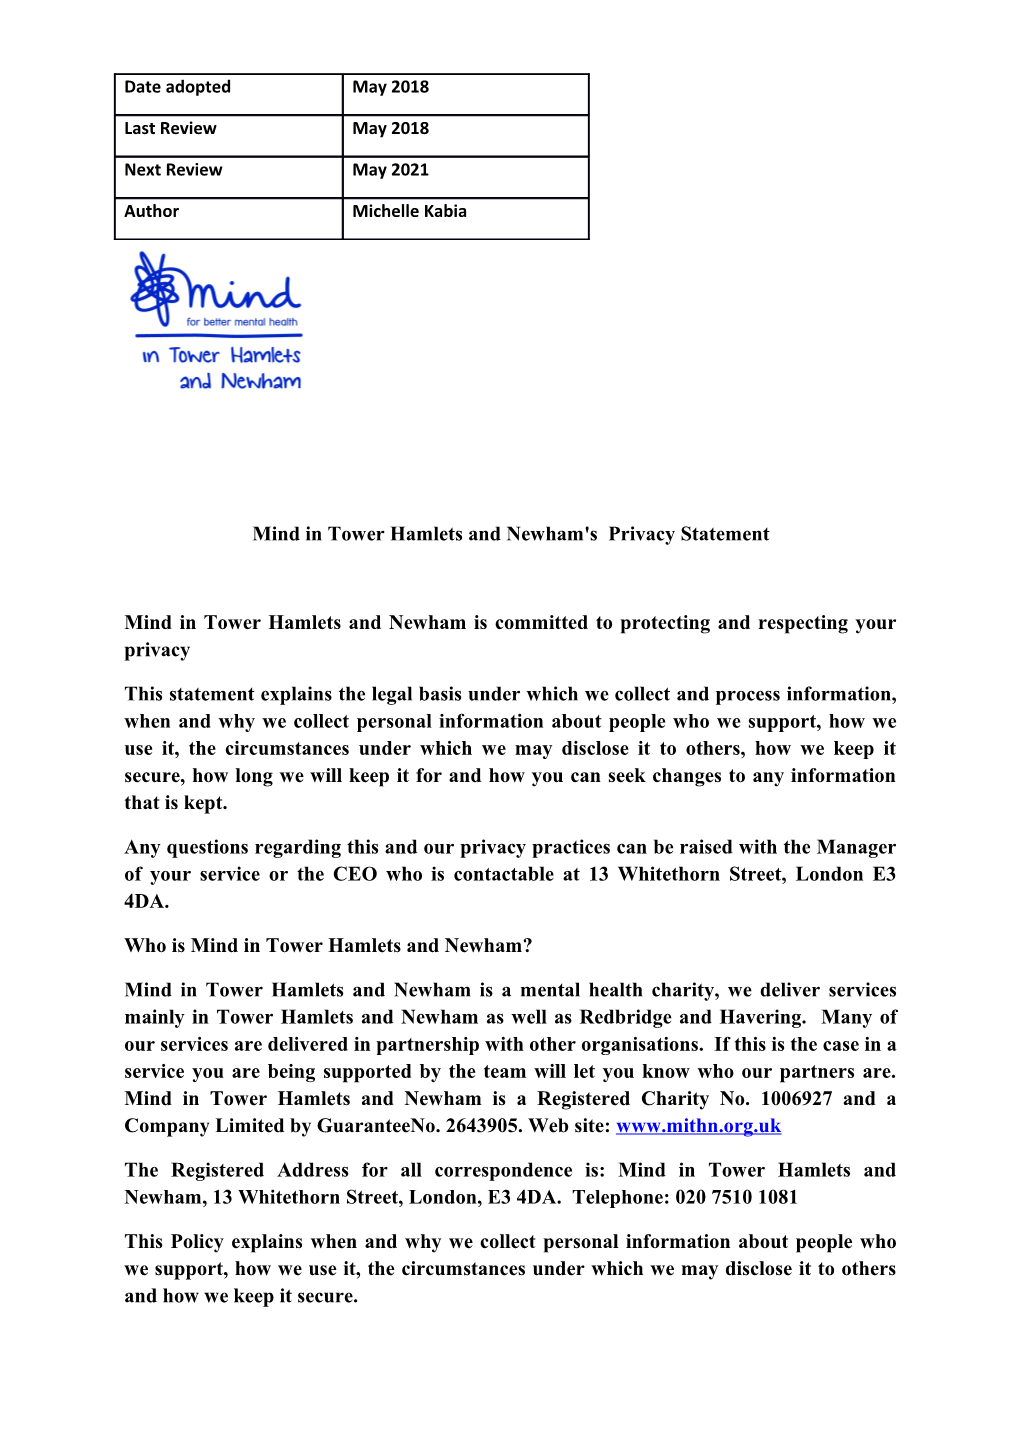 Mind in Tower Hamlets and Newham's Privacy Statement